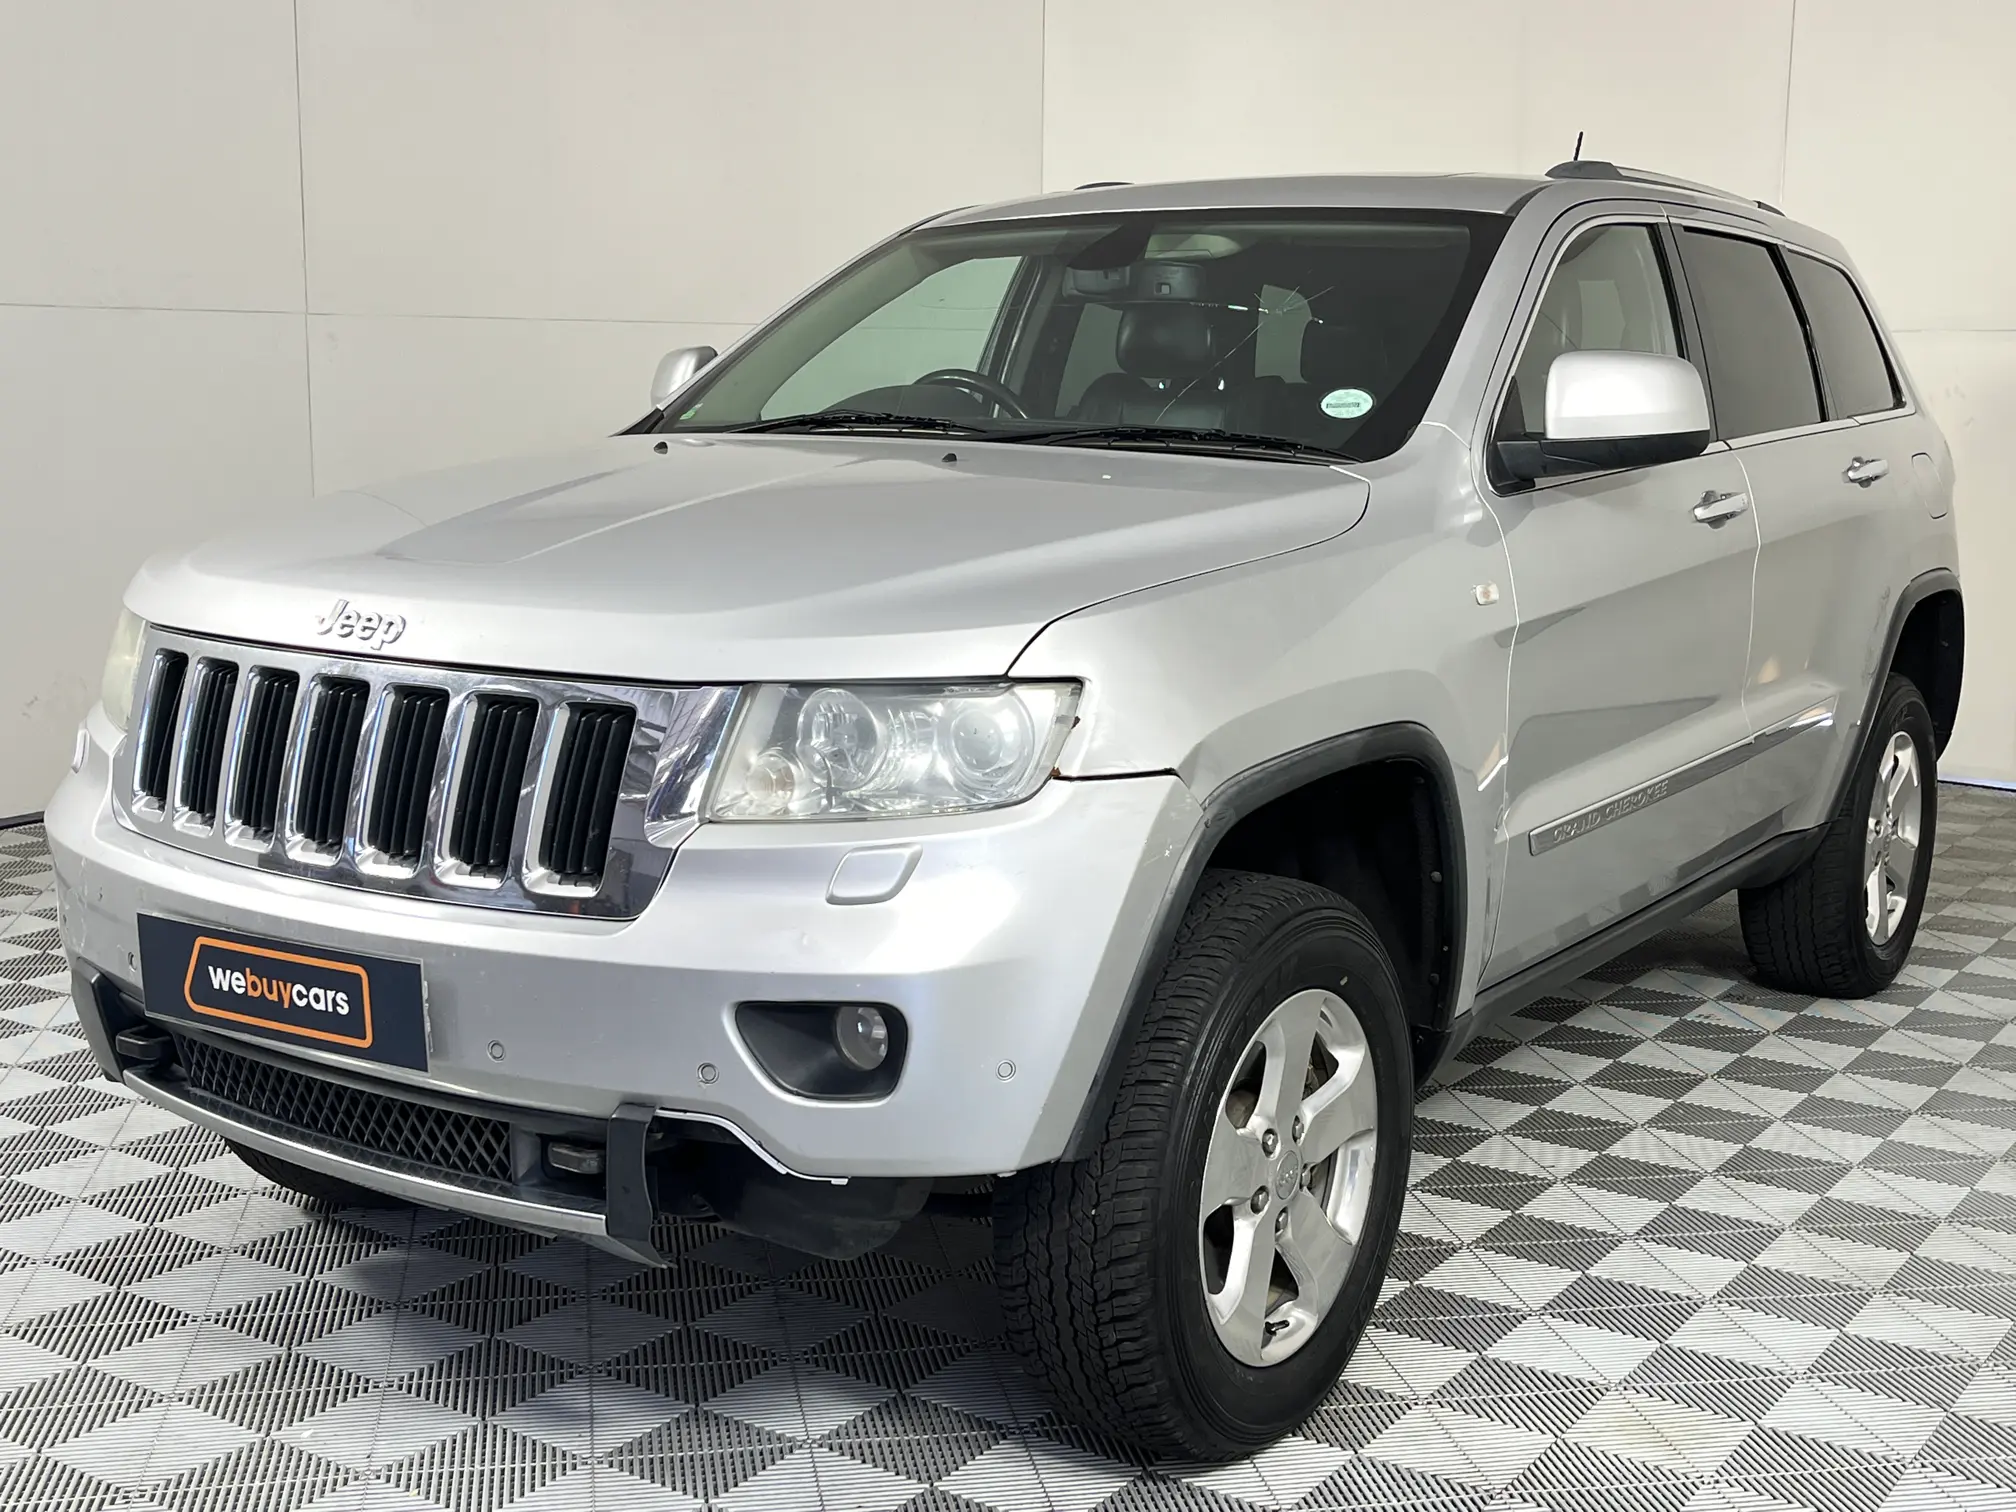 2011 Jeep Grand Cherokee 3.6 Limited